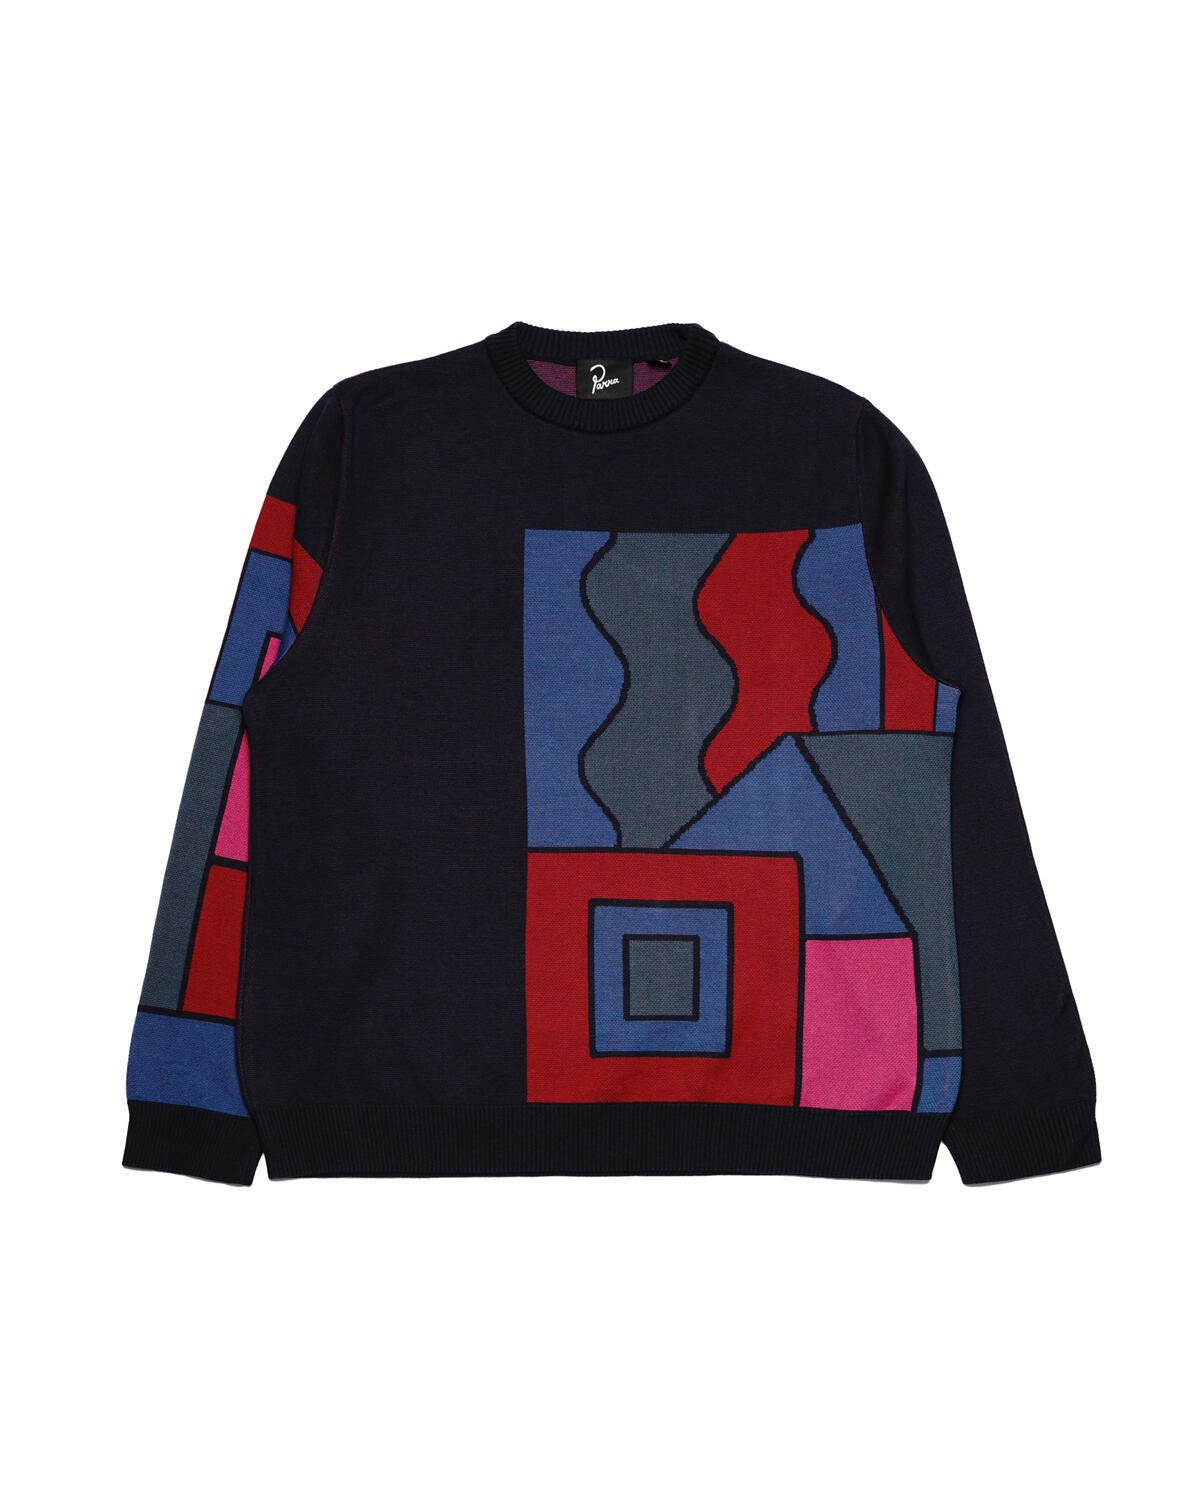 by Parra blocked landscape knitted pullover | 49125 | AFEW STORE